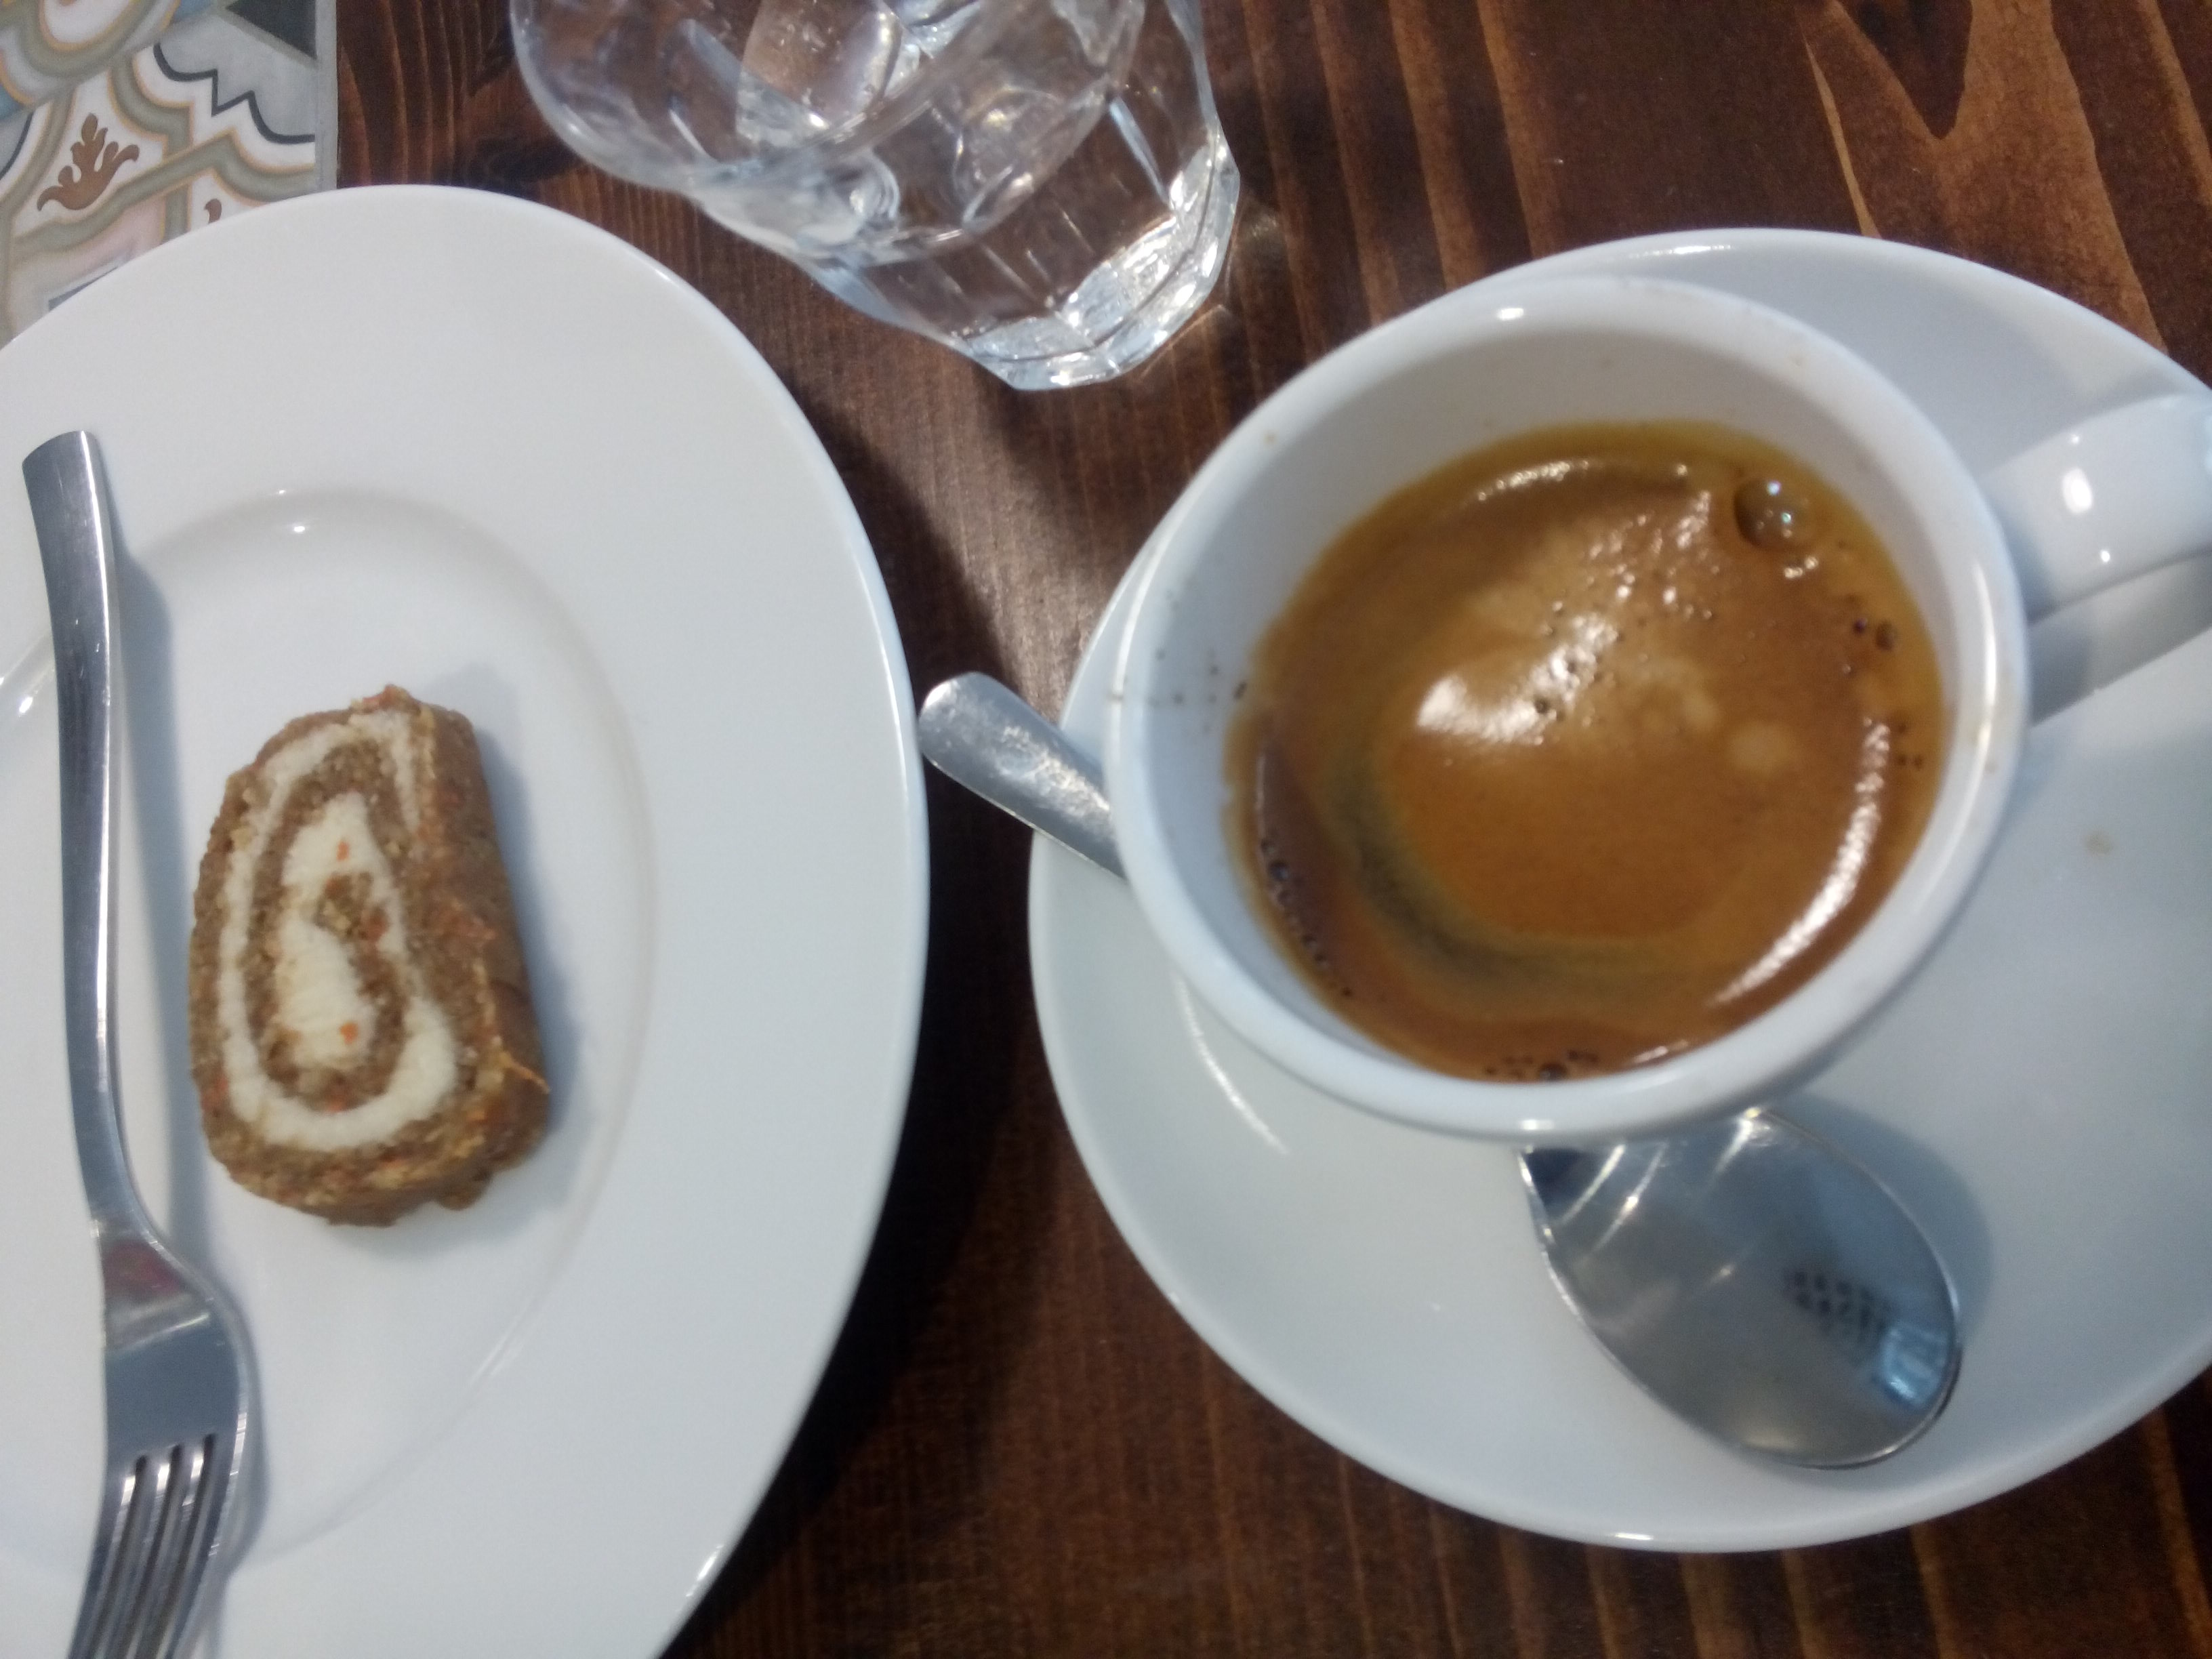 A small spiral cake on a plate with a fork beside a cup of coffee